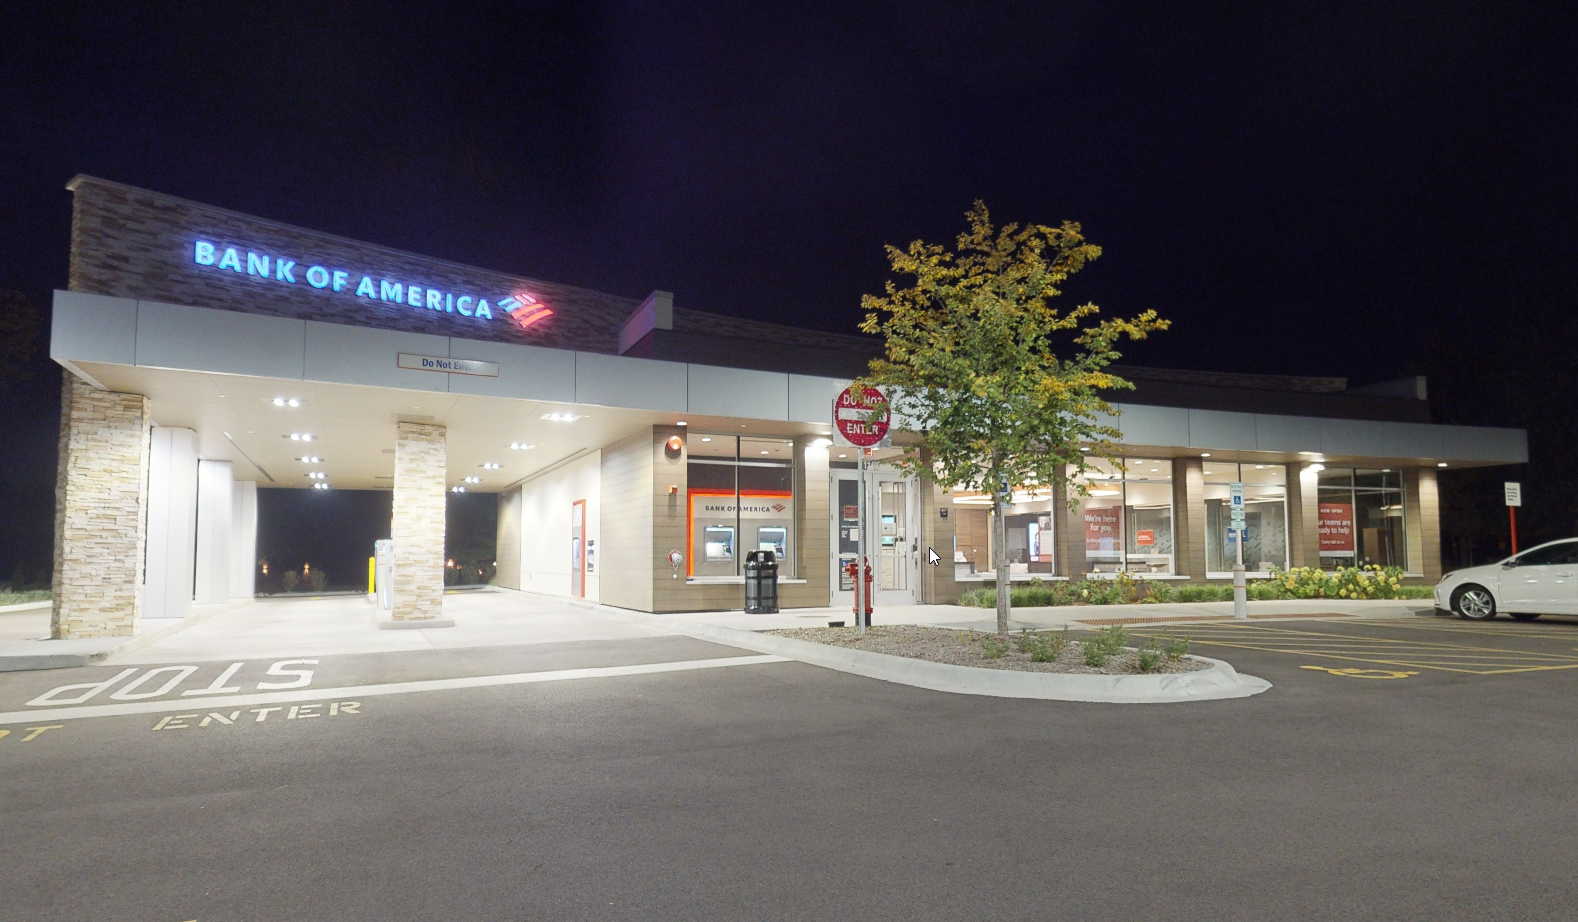 Bank of America financial center with drive-thru ATM | 1160 Shermer Rd, Northbrook, IL 60062